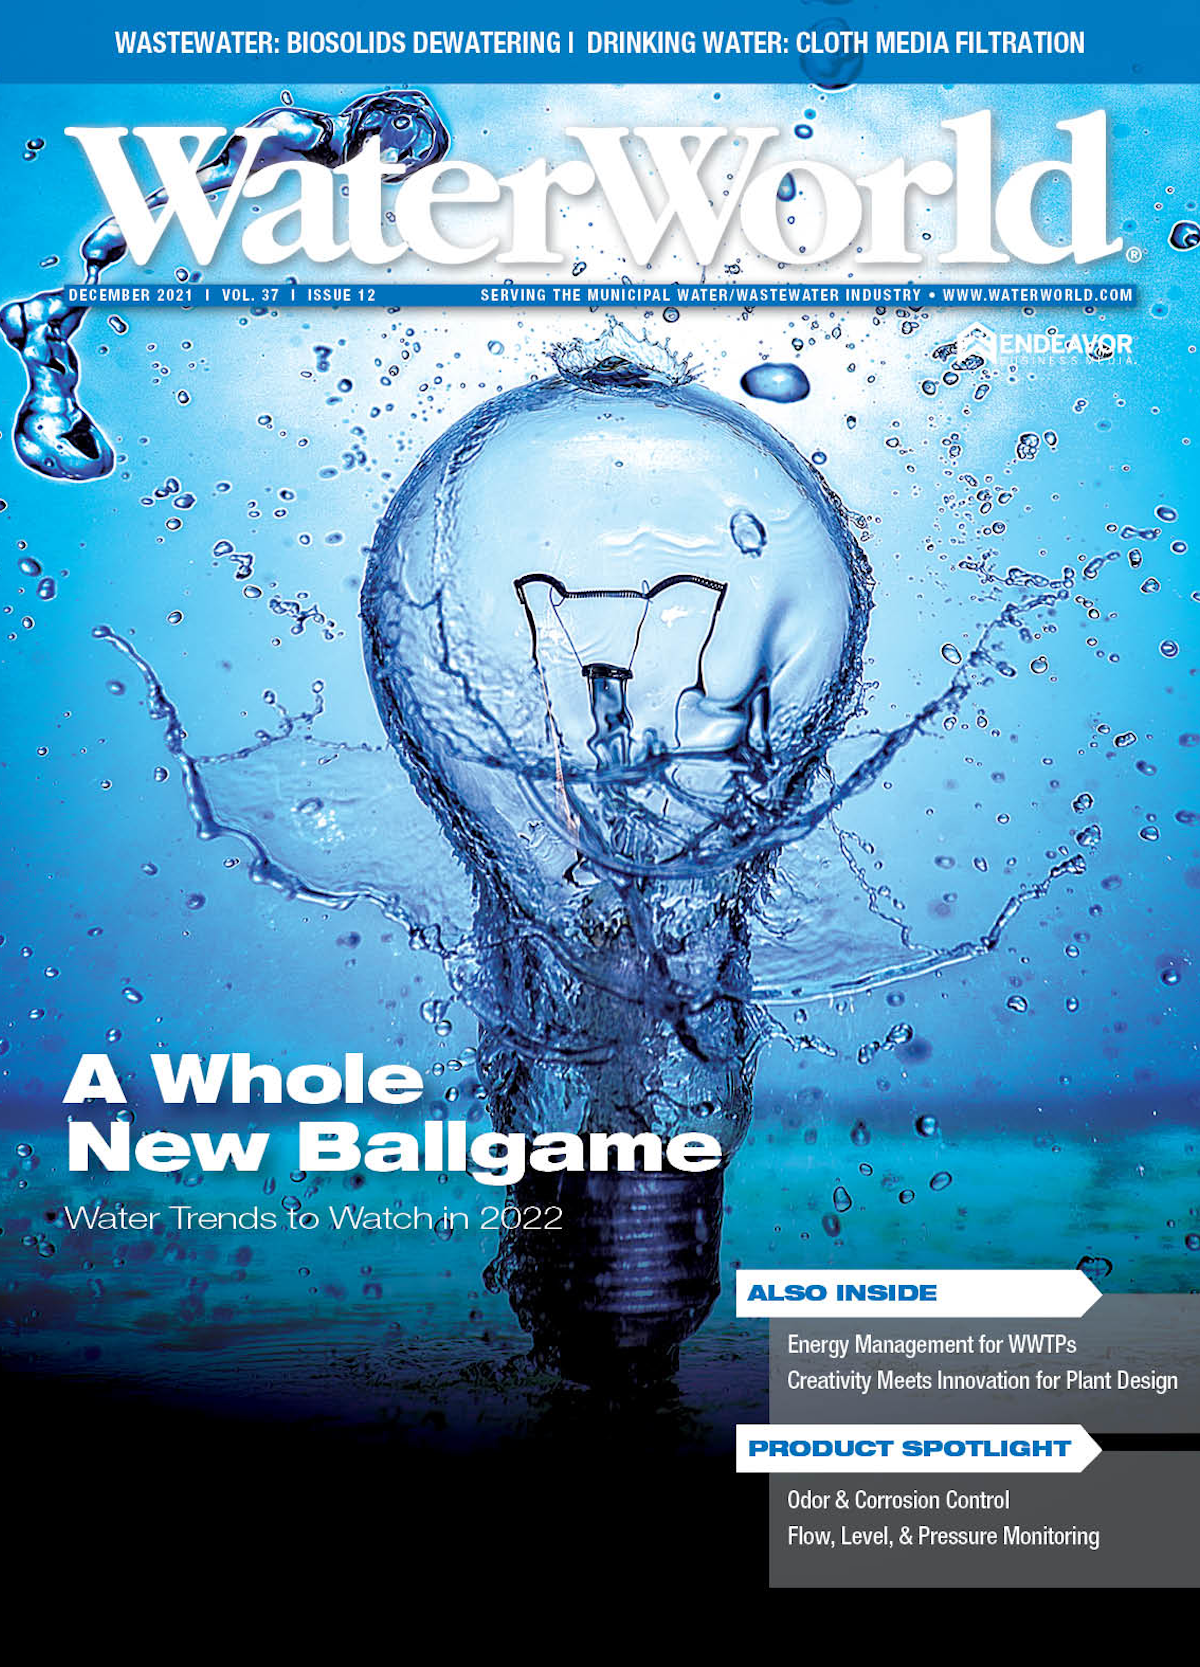 Volume 37, Issue 12, December 2021 cover image